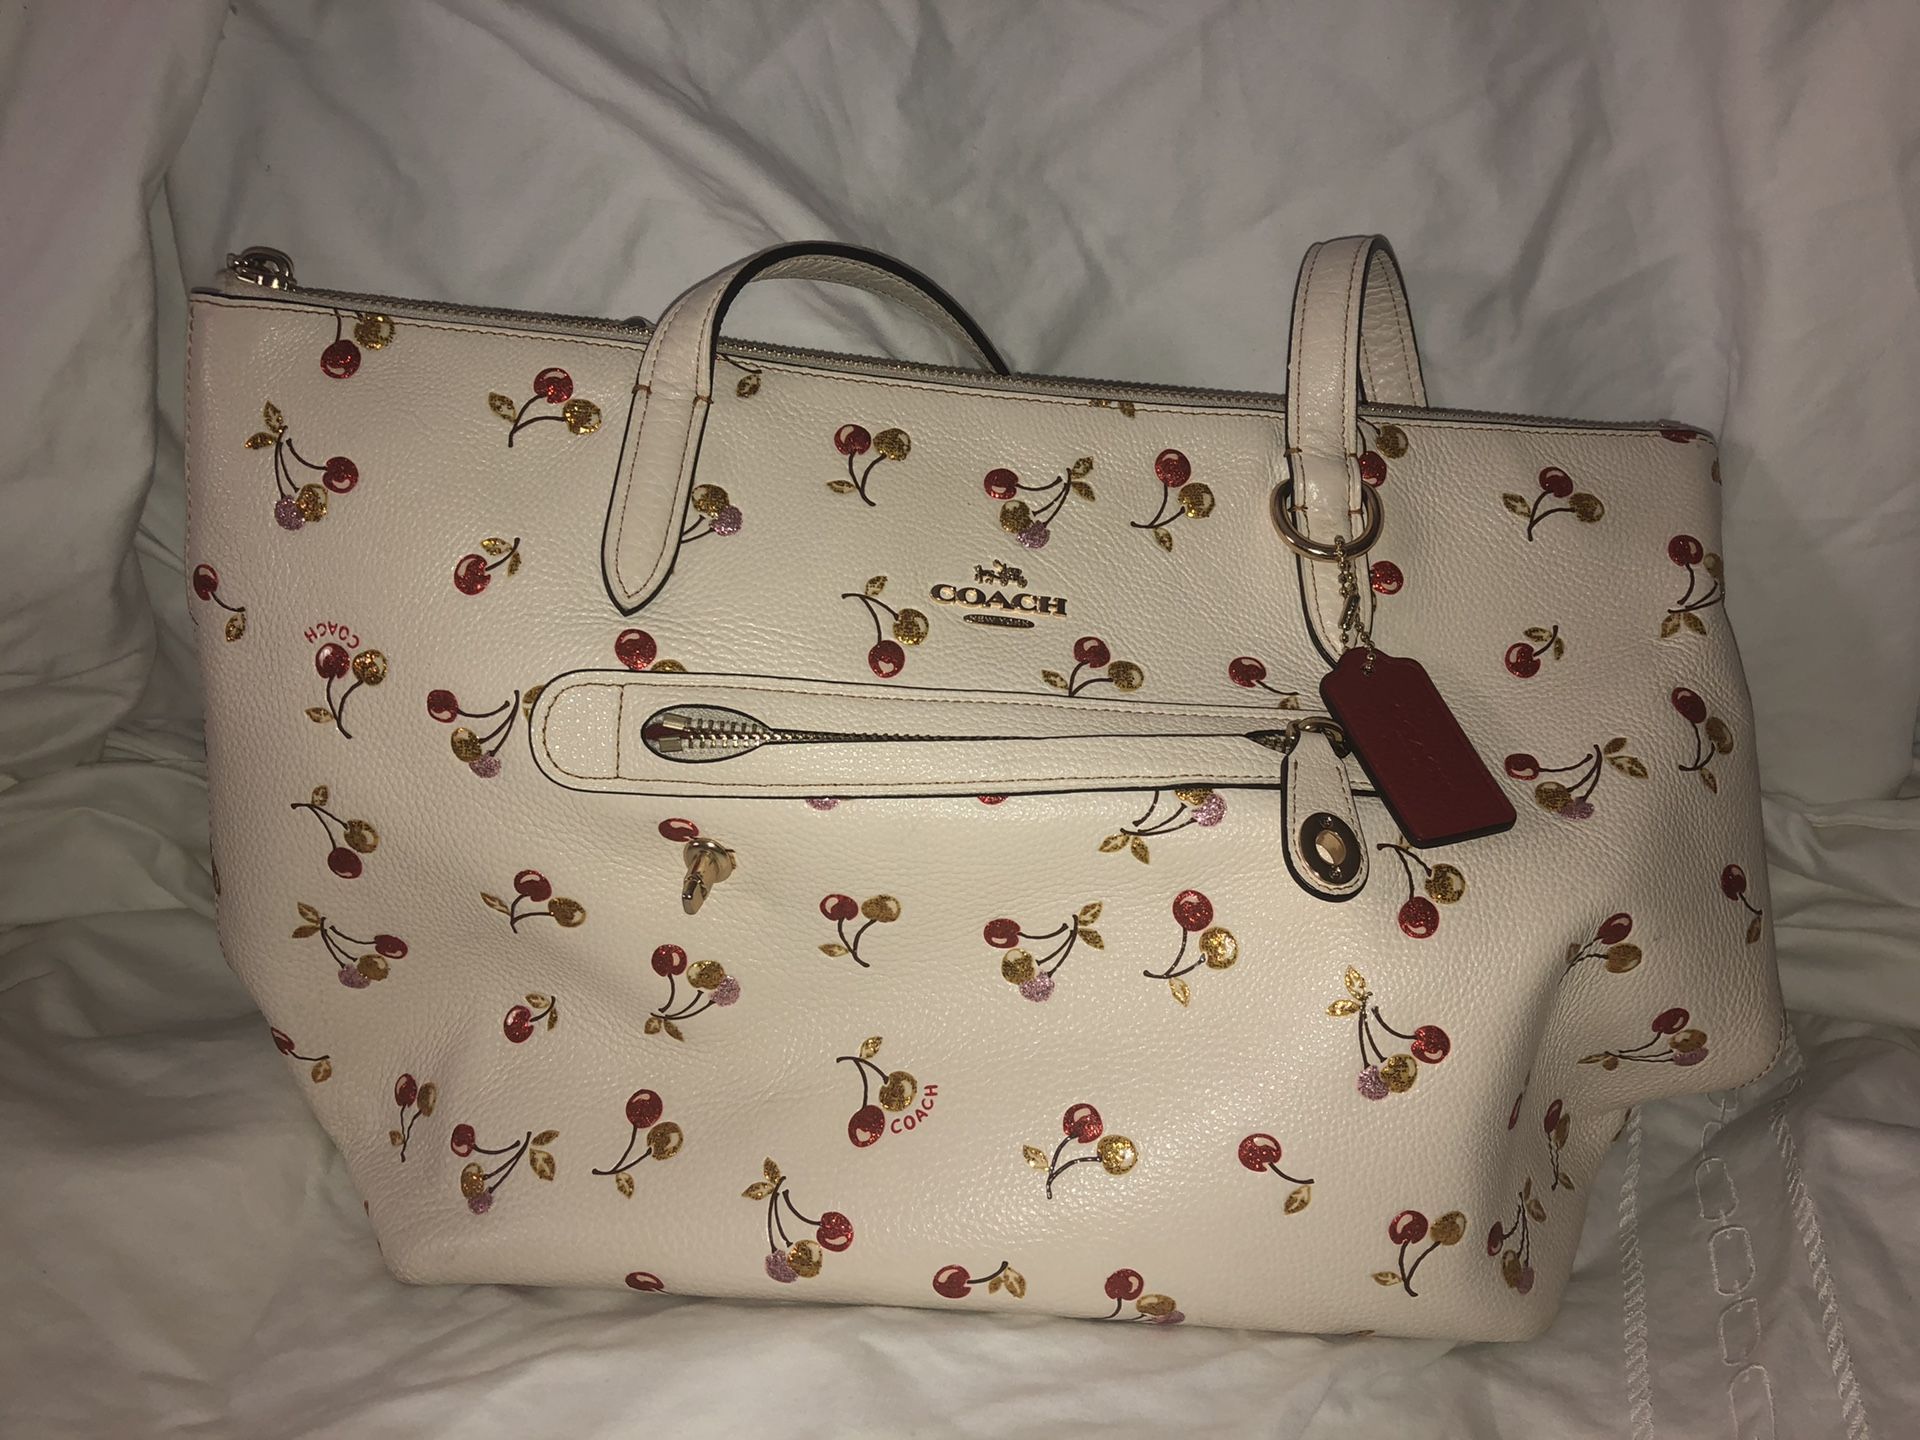 Limited edition COACH hobo with Cherries